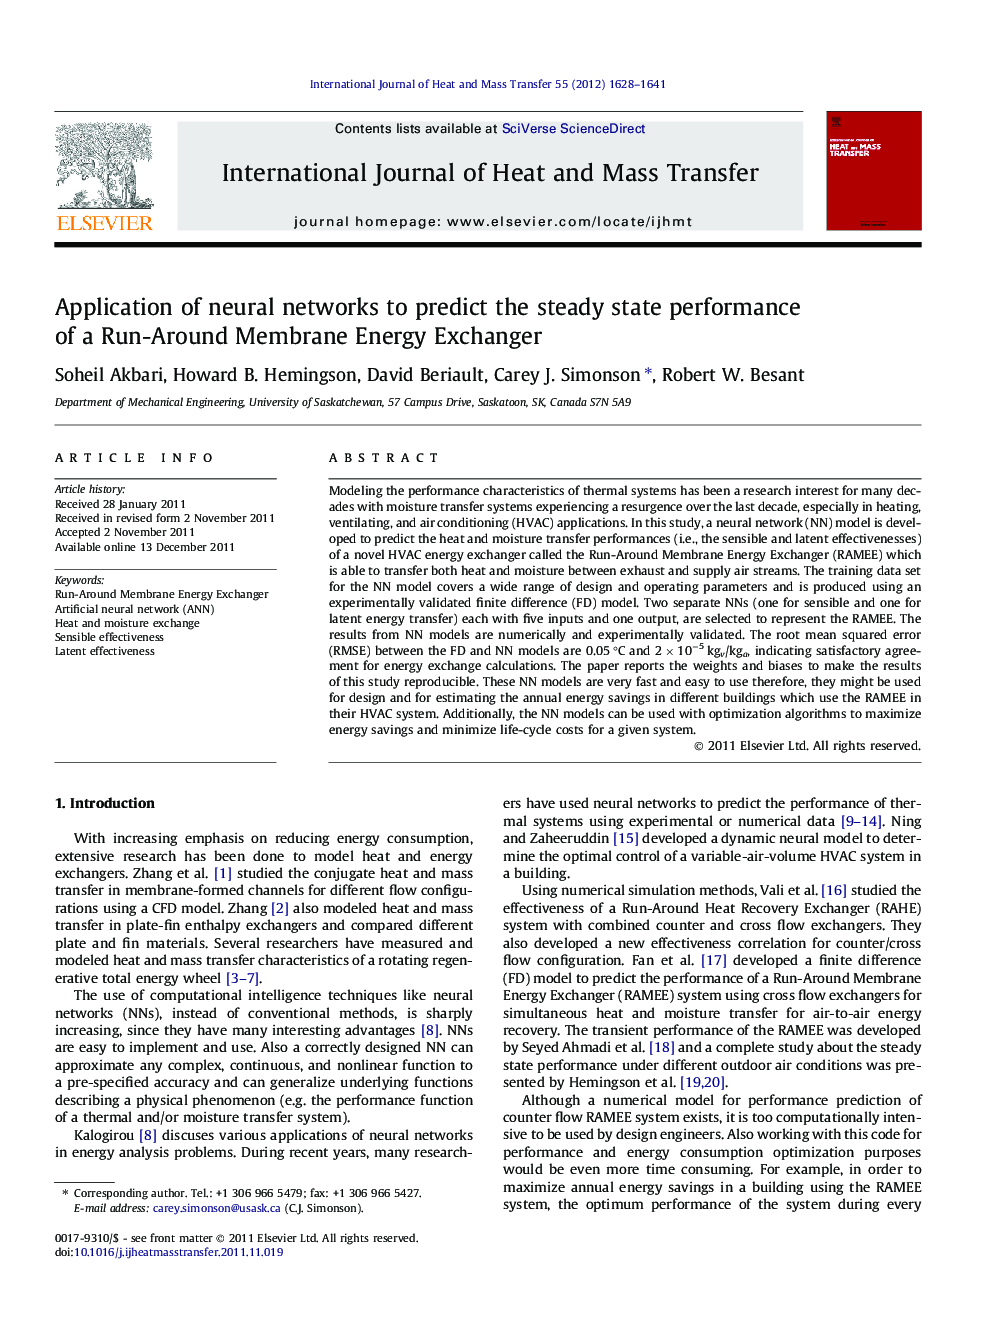 Application of neural networks to predict the steady state performance of a Run-Around Membrane Energy Exchanger